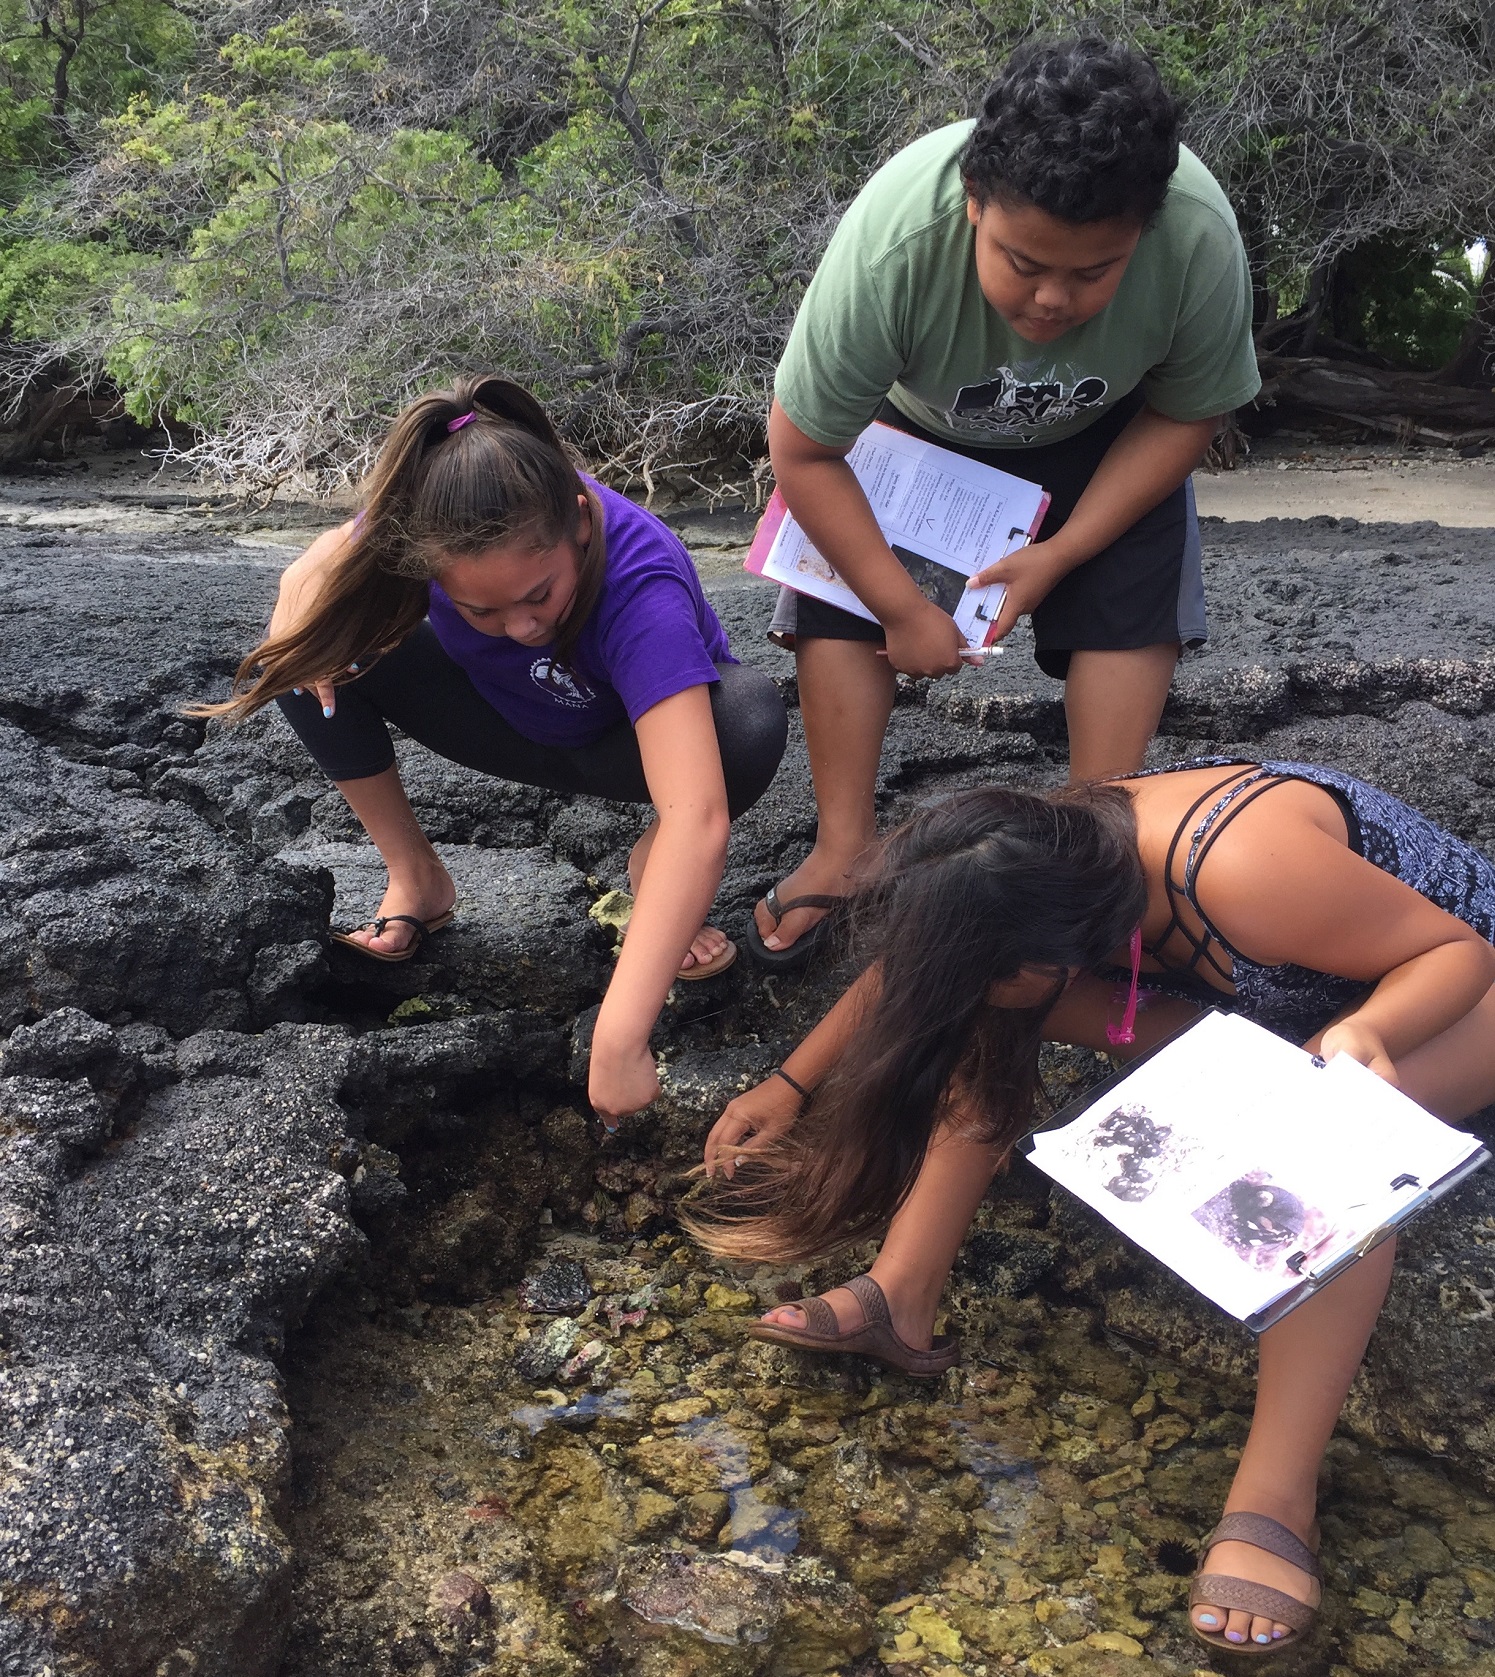 3 students kneel over rocks in intertidal zone looking for species in the water. 2 hold identification keys.